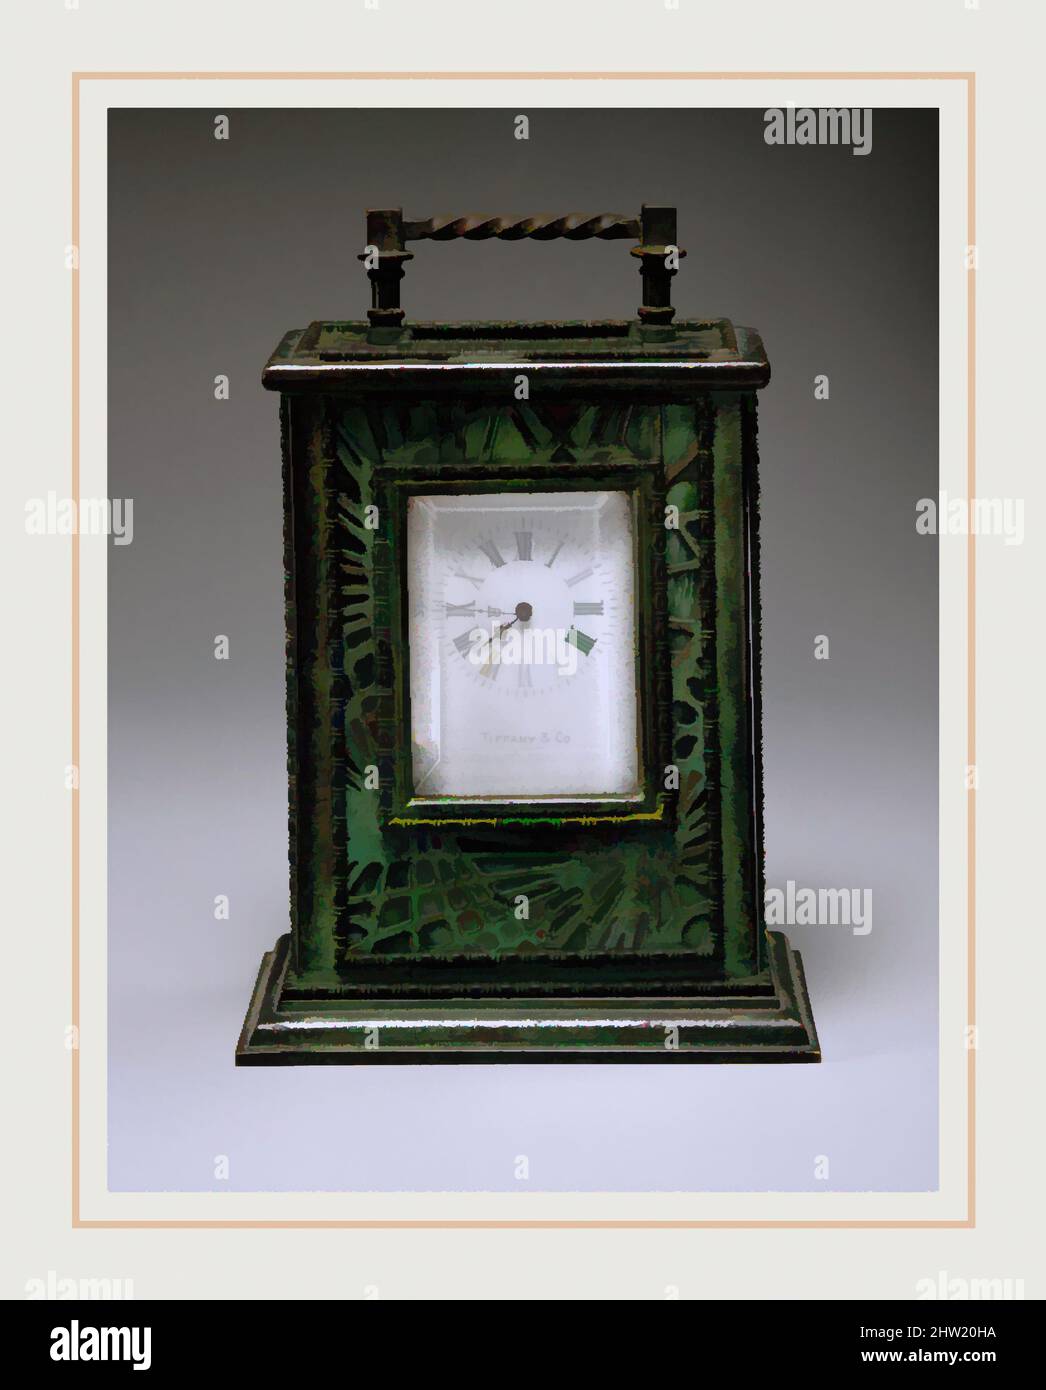 Art inspired by Clock, ca. 1905–20, Made in New York, New York, United States, American, Glass, bronze, 4 3/4 x 3 1/2 x 2 3/8 in. (12.1 x 8.9 x 6 cm), Metal, Tiffany Studios (1902–32, Classic works modernized by Artotop with a splash of modernity. Shapes, color and value, eye-catching visual impact on art. Emotions through freedom of artworks in a contemporary way. A timeless message pursuing a wildly creative new direction. Artists turning to the digital medium and creating the Artotop NFT Stock Photo